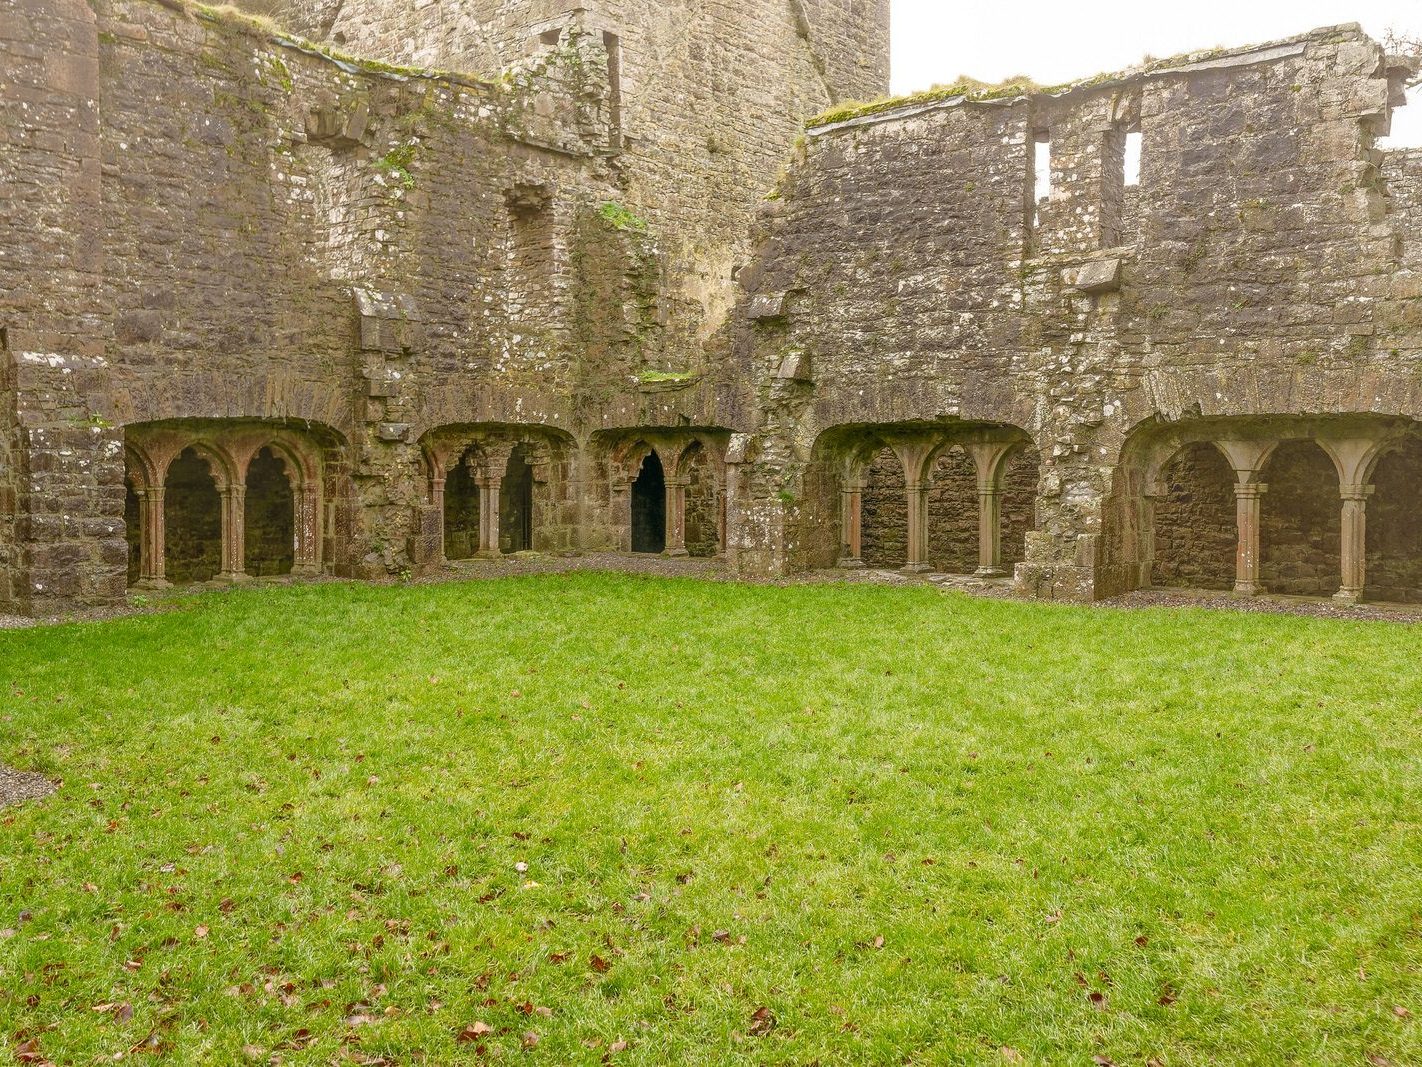 BECTIVE ABBEY WHICH I VISITED LAST CHRISTMAS [THERE WERE NO OTHER VISITORS AS IT WAS A VERY WET DAY]--225220-1